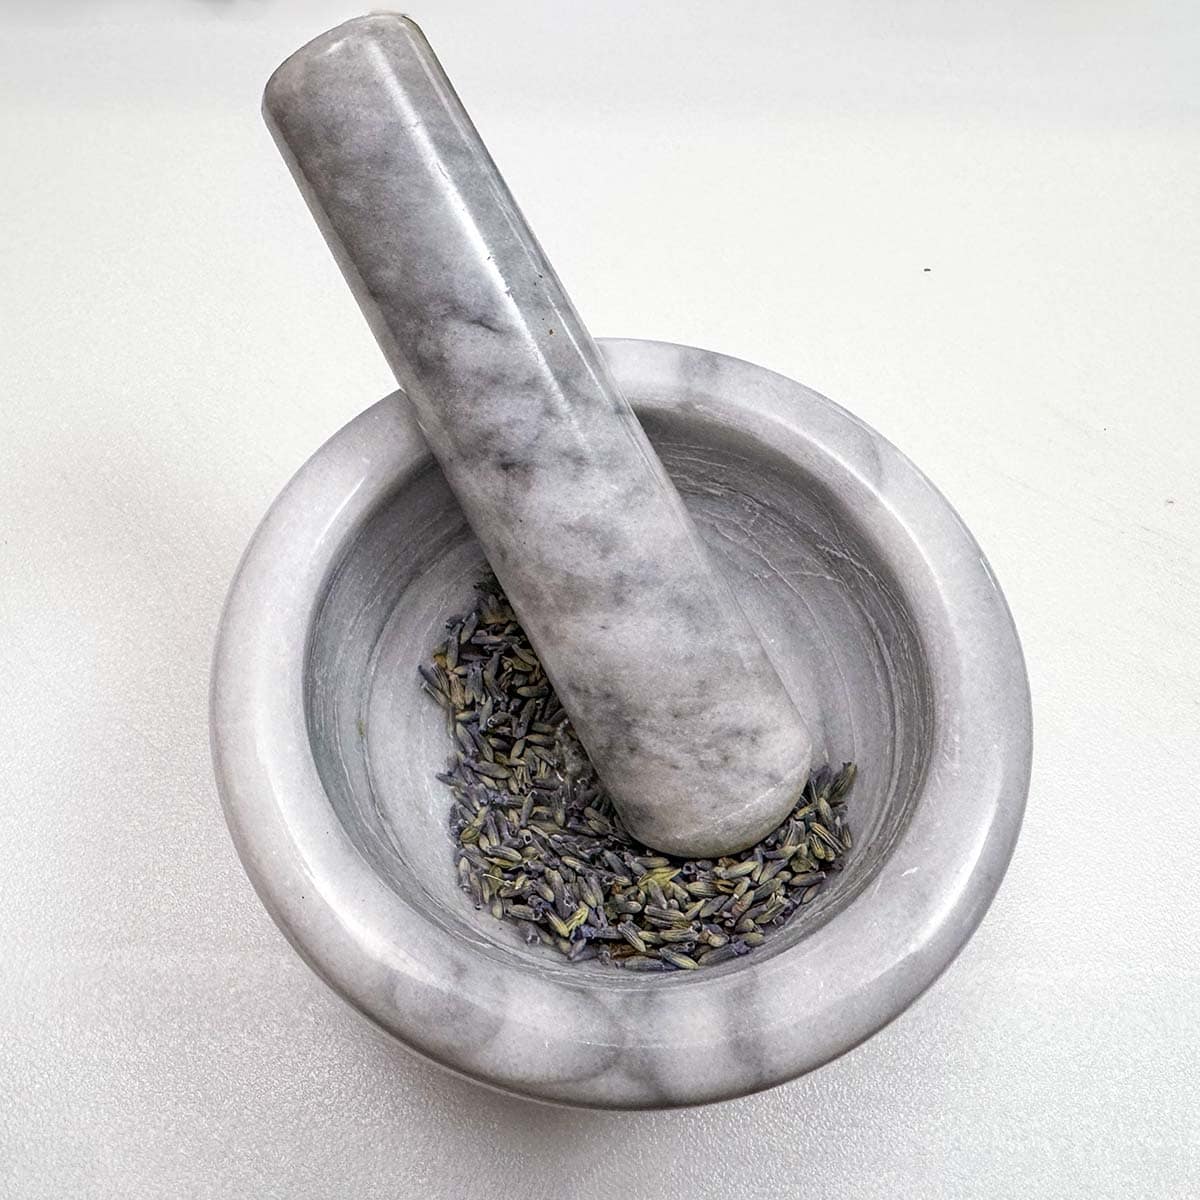 Crushing lavender in a mortar and pestle.